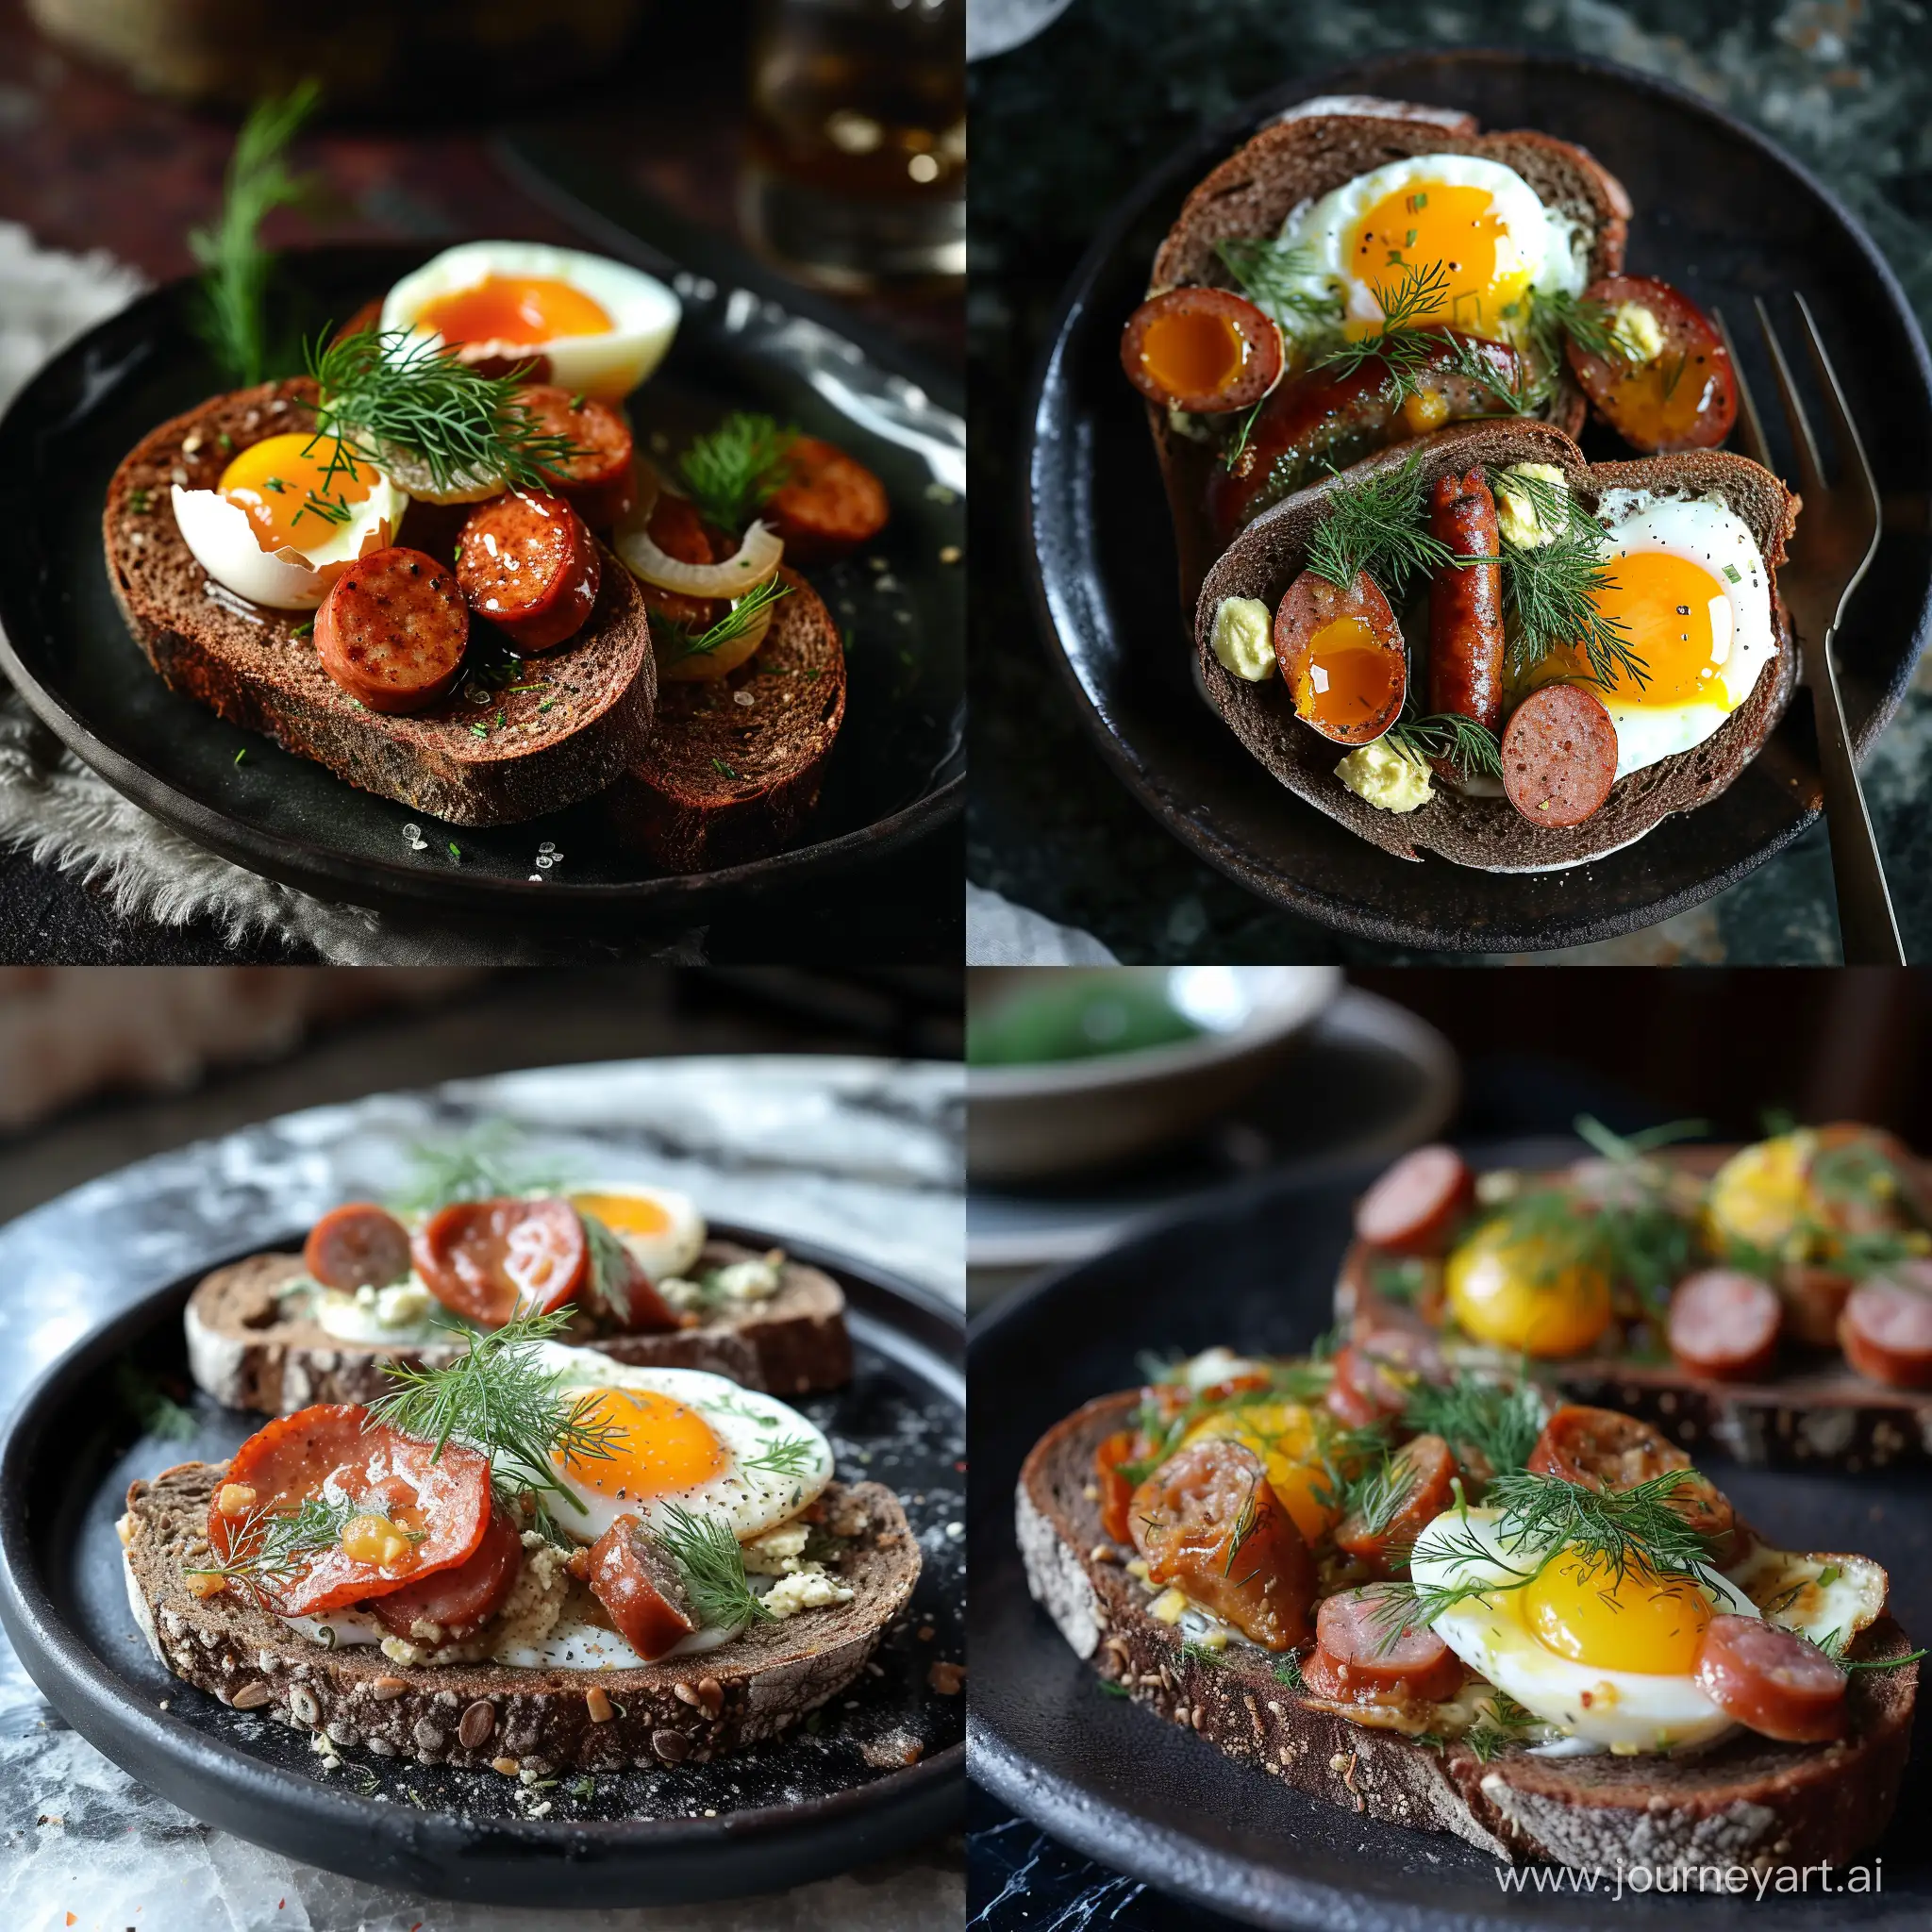 Savory-Rye-Toast-Breakfast-with-Egg-Sausage-and-Dill-on-Dark-Plate